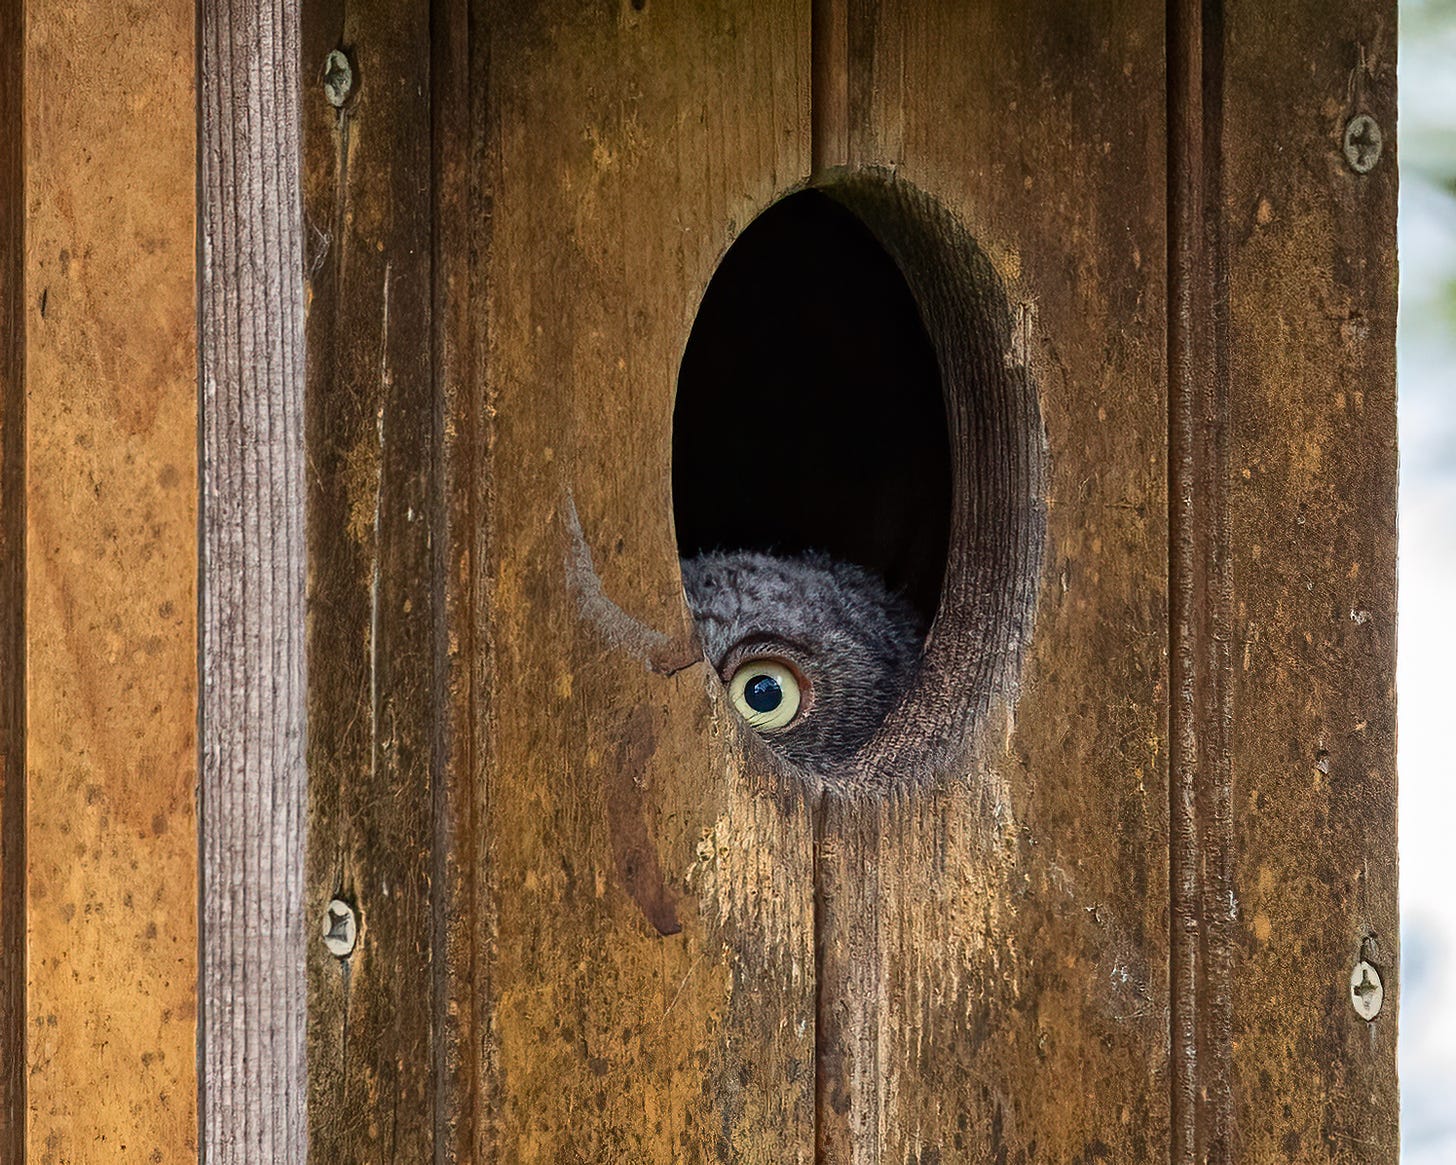 The nestling owl is completely inside the box, and you can see his little head just above the hole. You can only see one eye peering out.